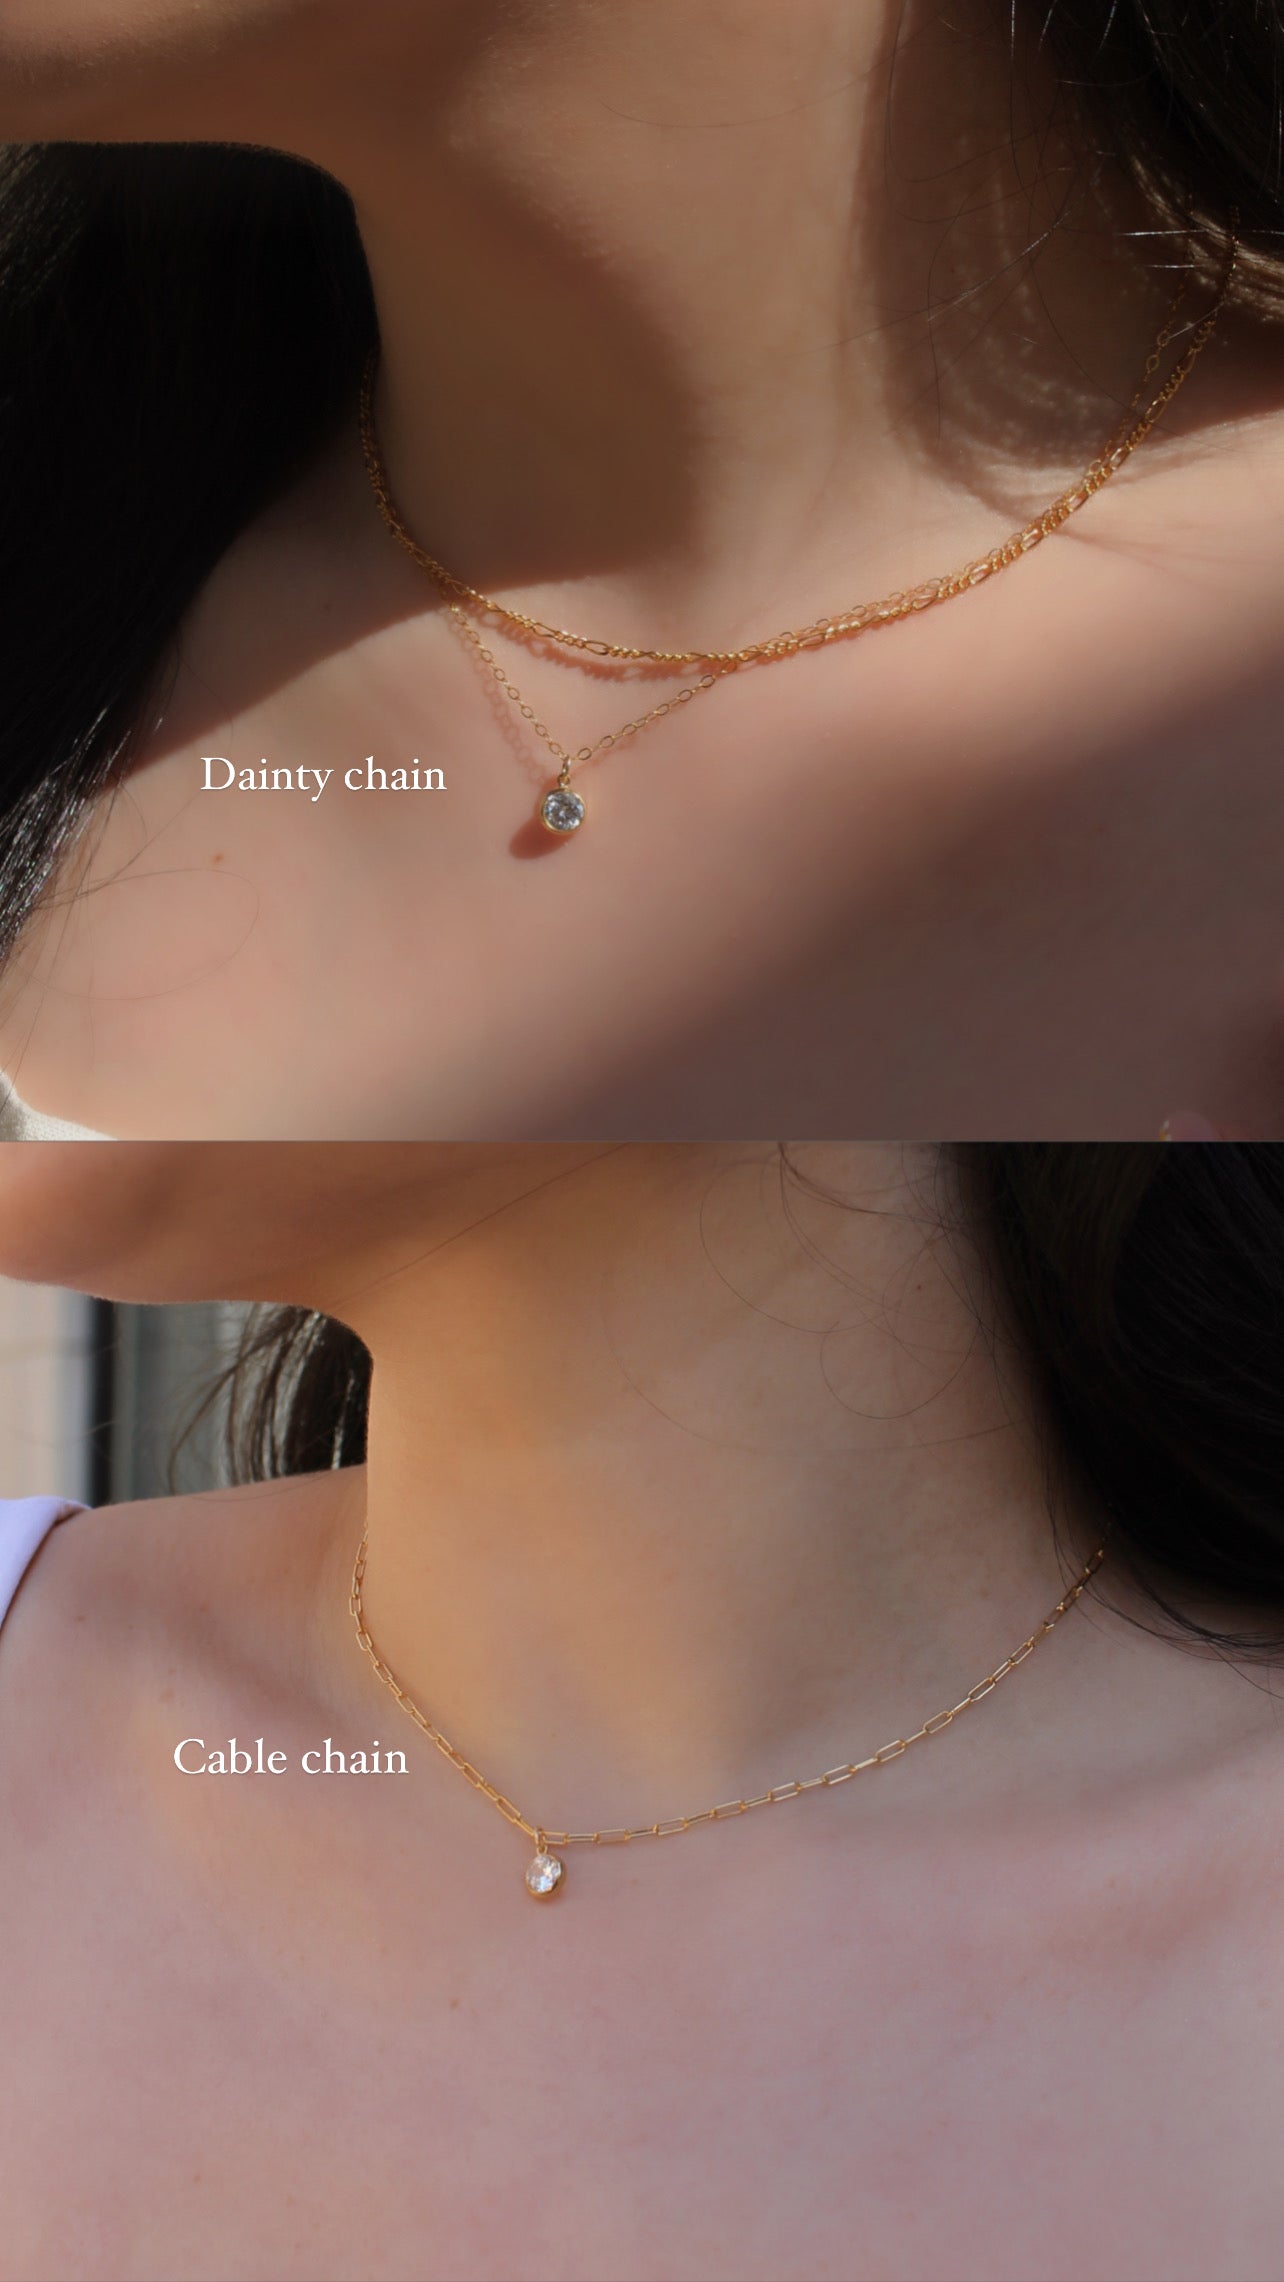 Dainty Louis necklace